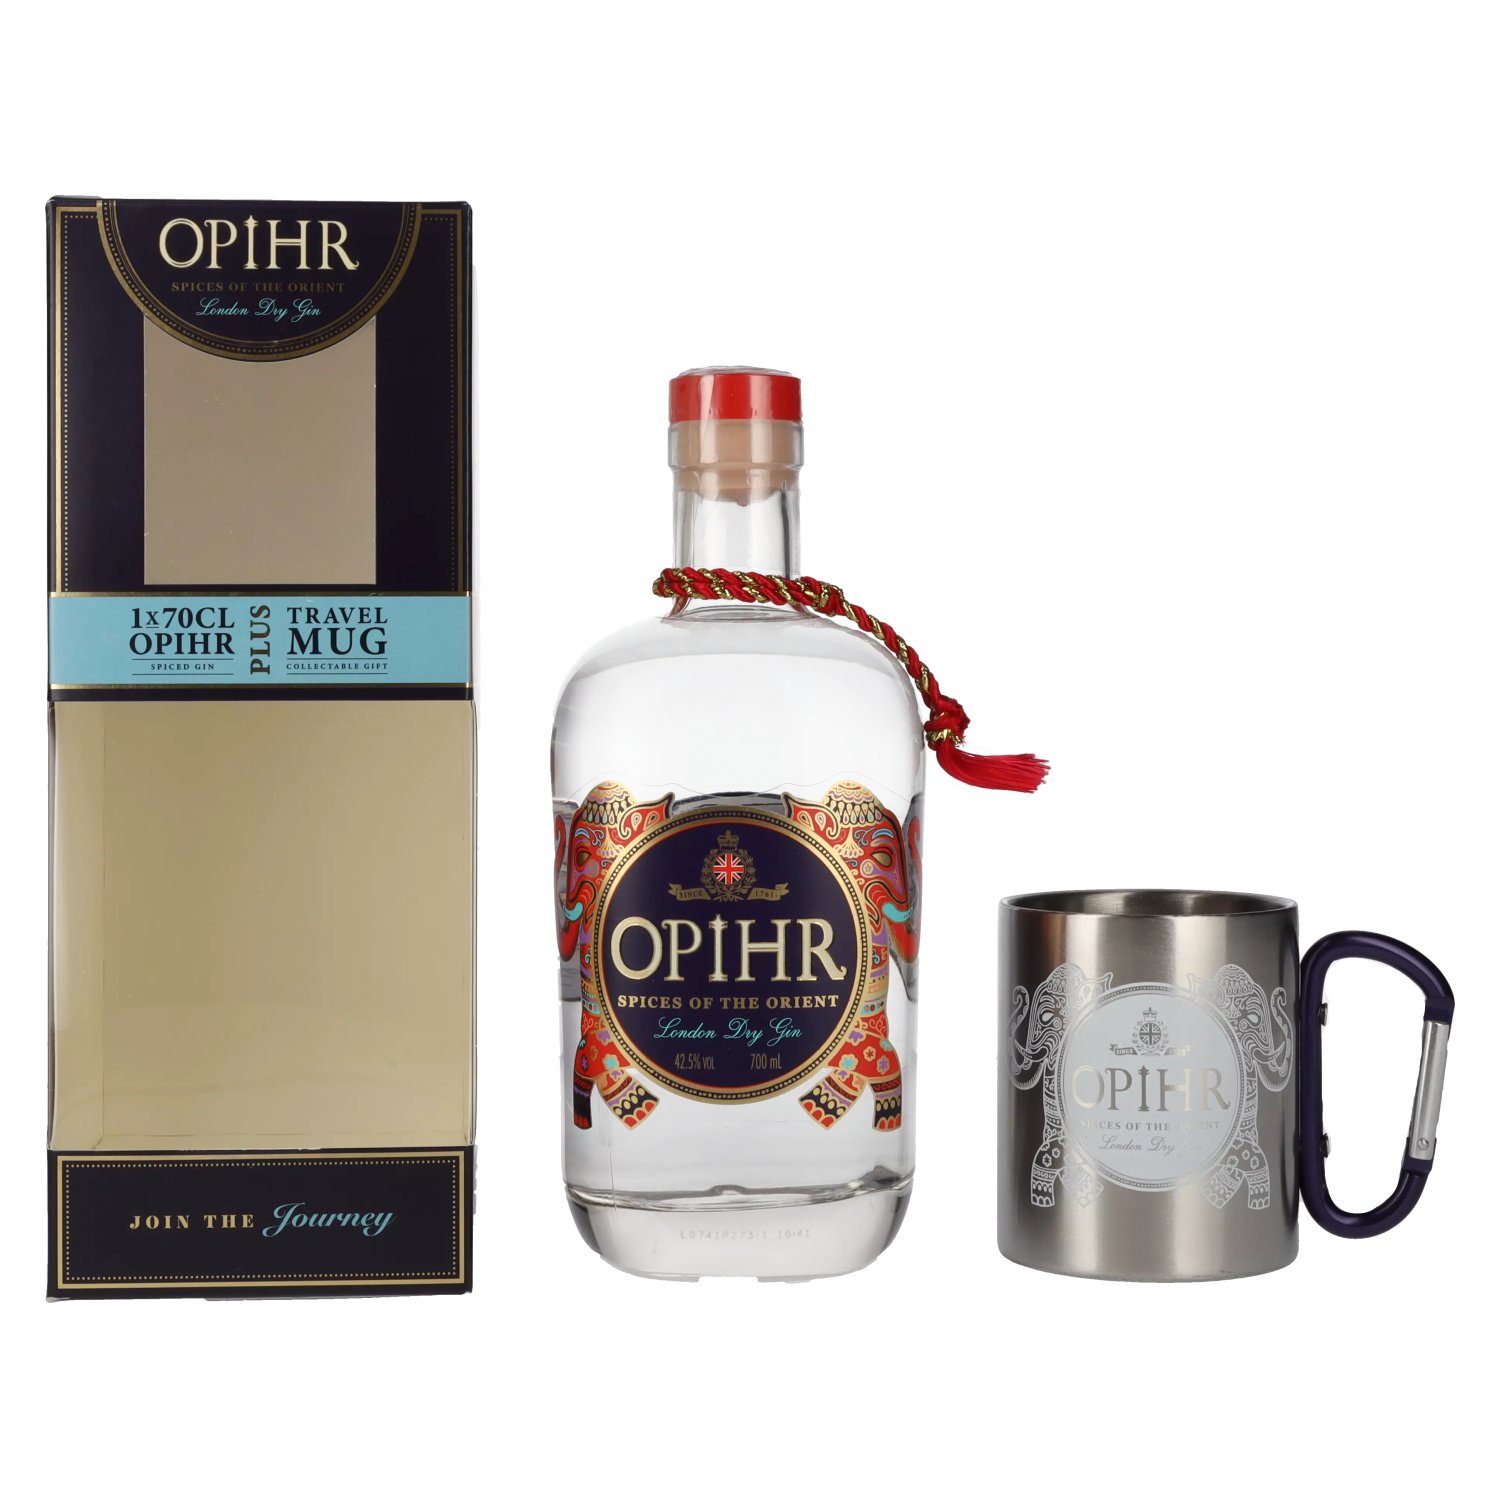 Opihr ORIENTAL SPICED London Dry Gin 42,5% Vol. 0,7l in Giftbox with Travel  Mug